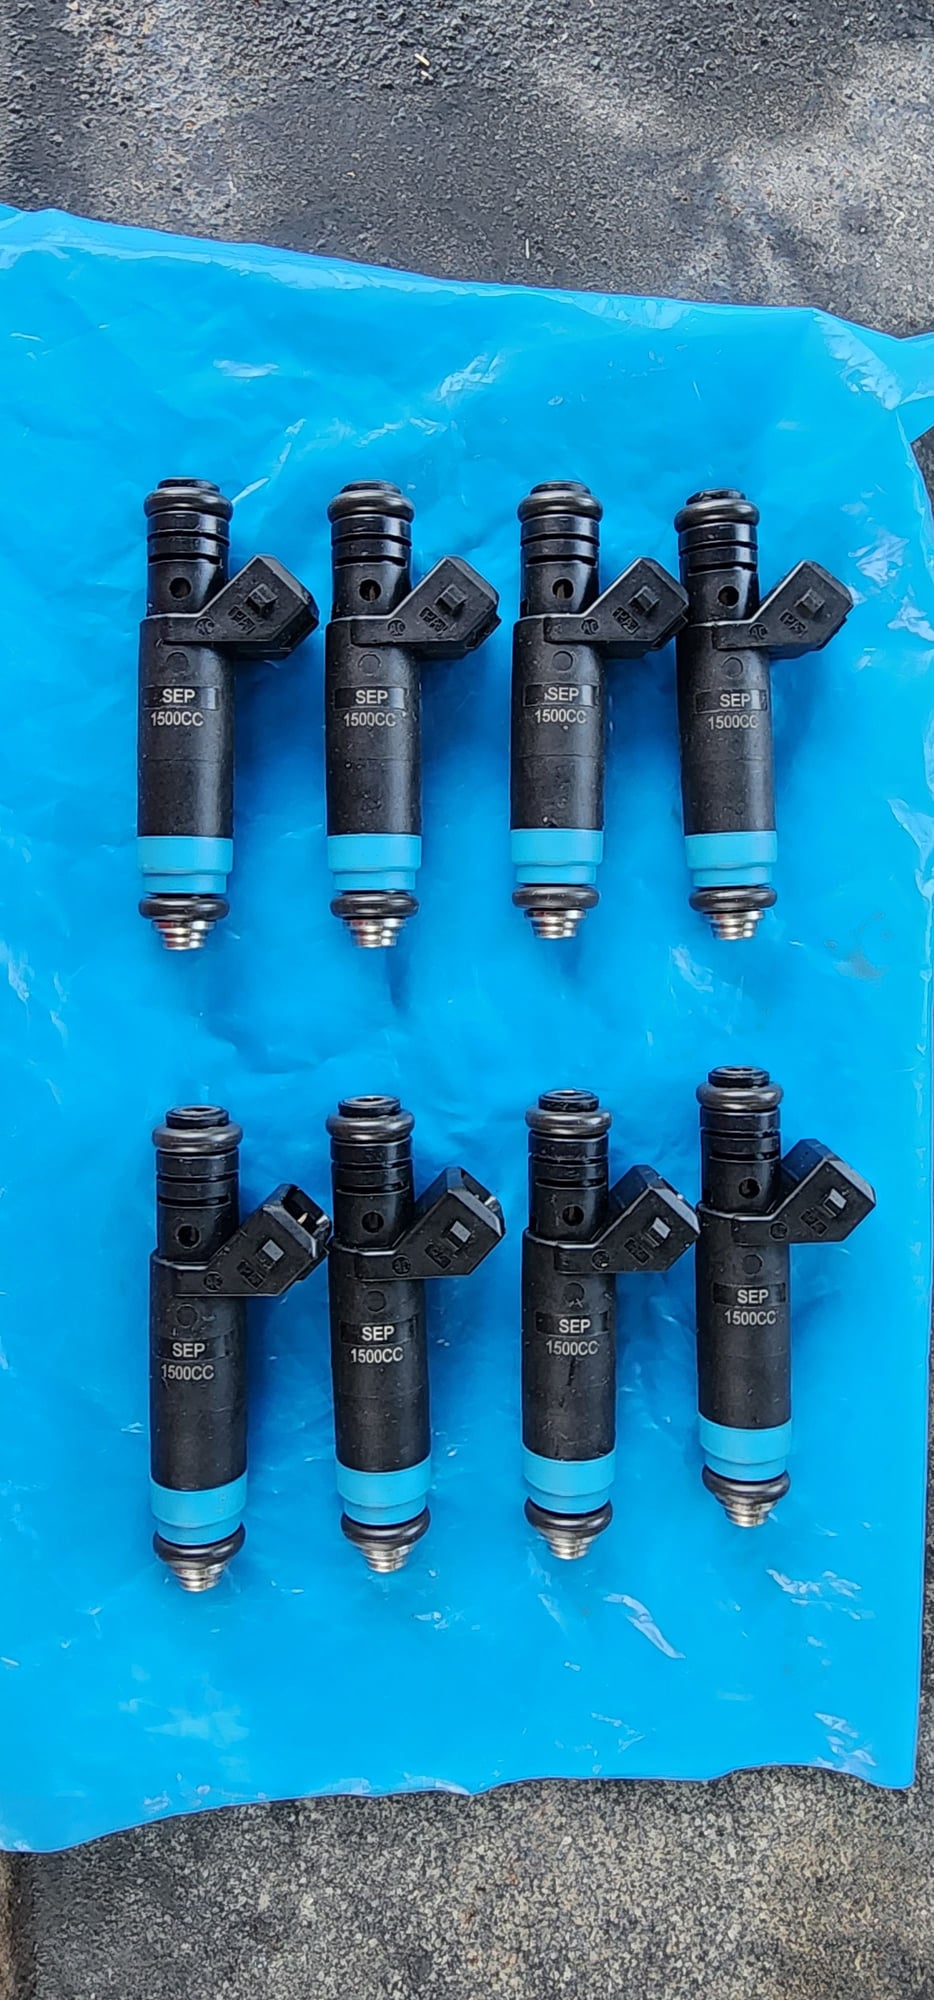 Engine - Intake/Fuel - Intake injectors - New - All Years  All Models - Opelousas, LA 70570, United States